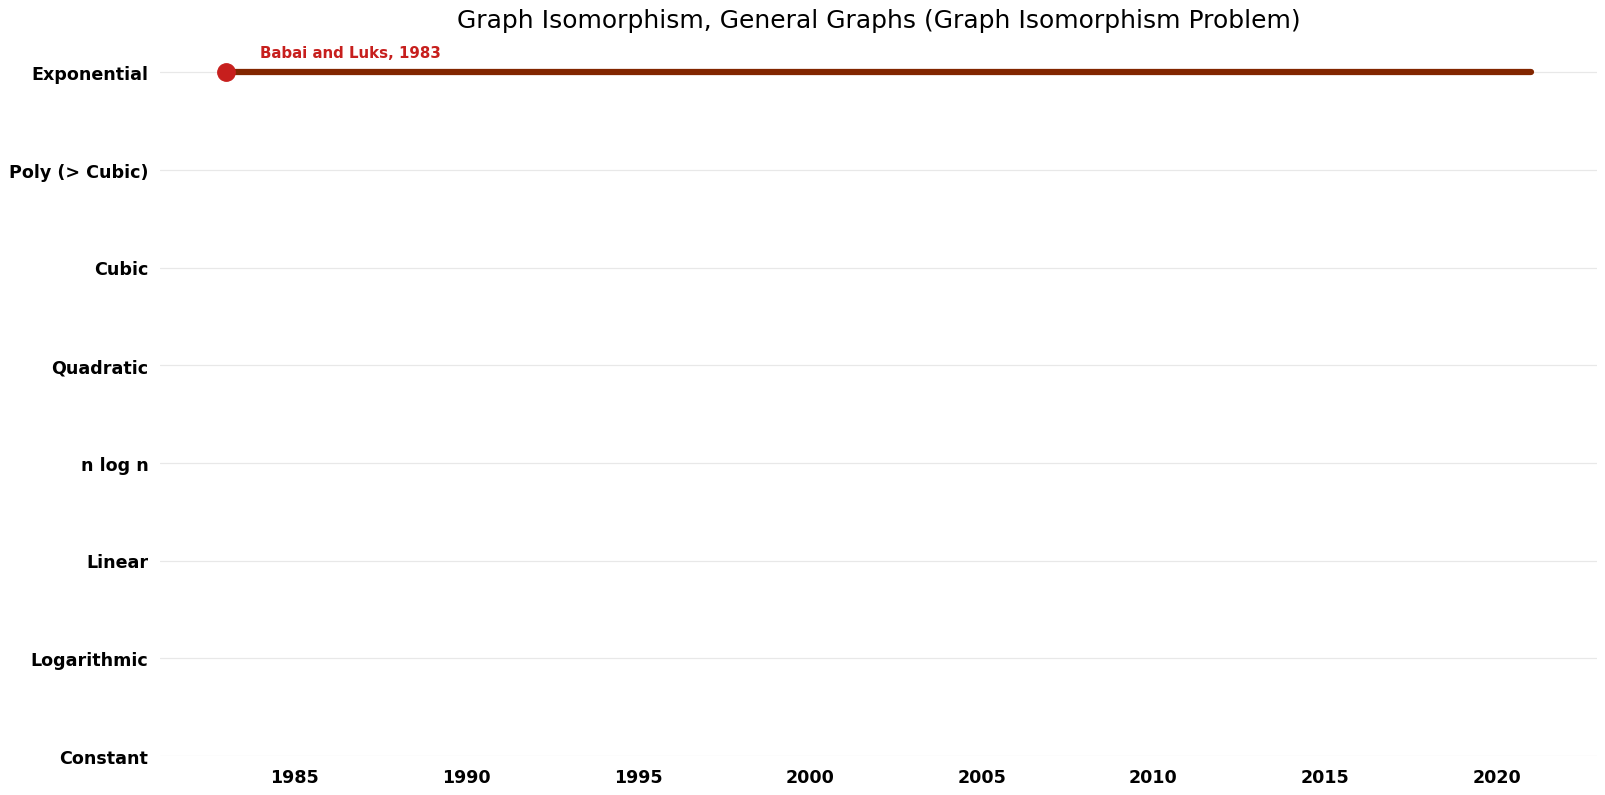 Graph Isomorphism Problem - Graph Isomorphism, General Graphs - Time.png